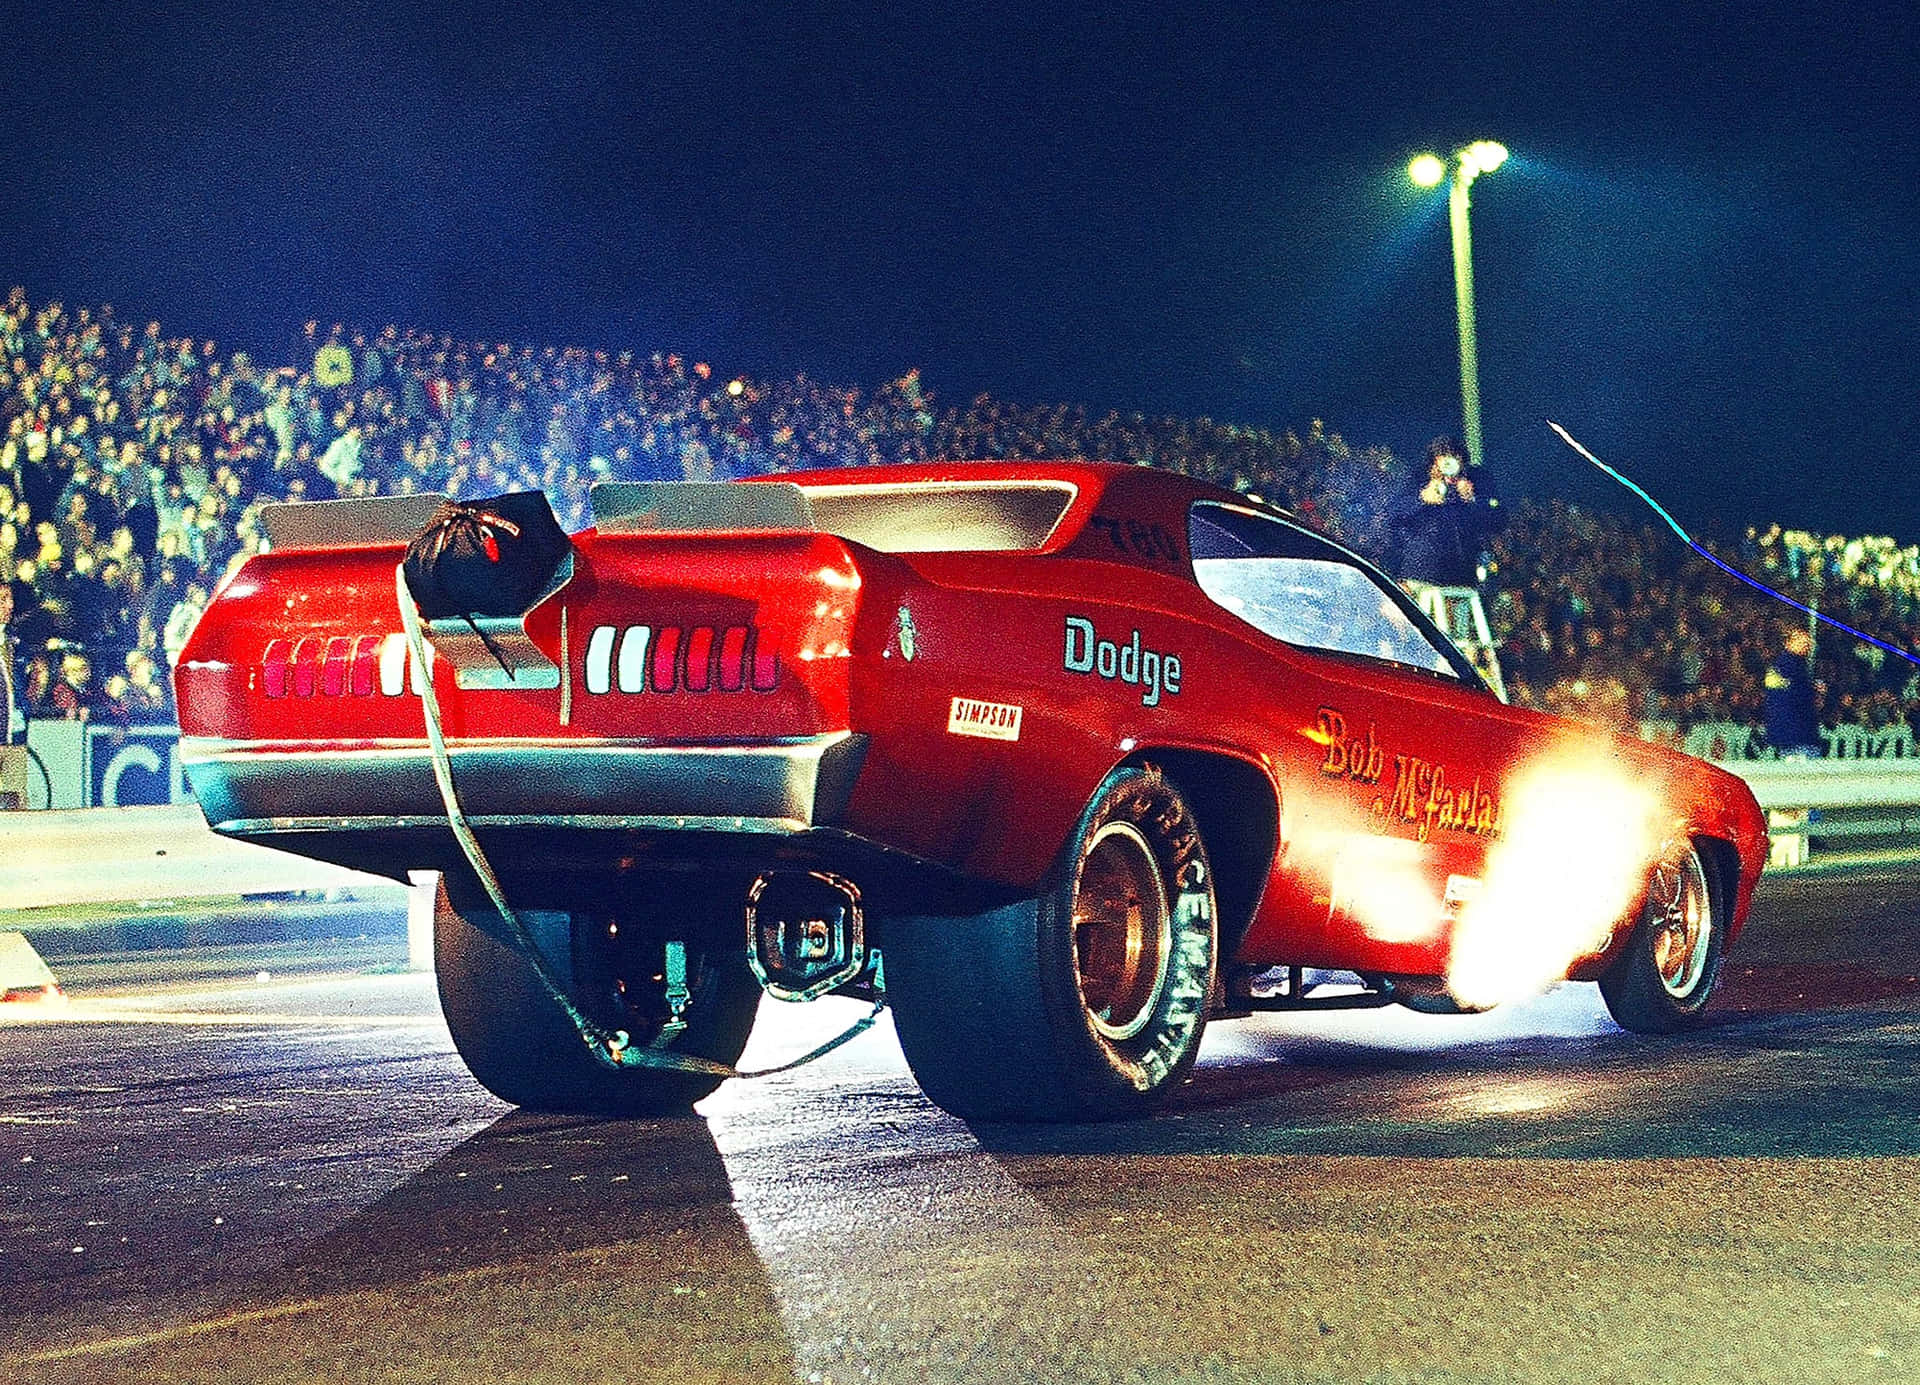 Racing in Style - Feel the Power of a Funny Car